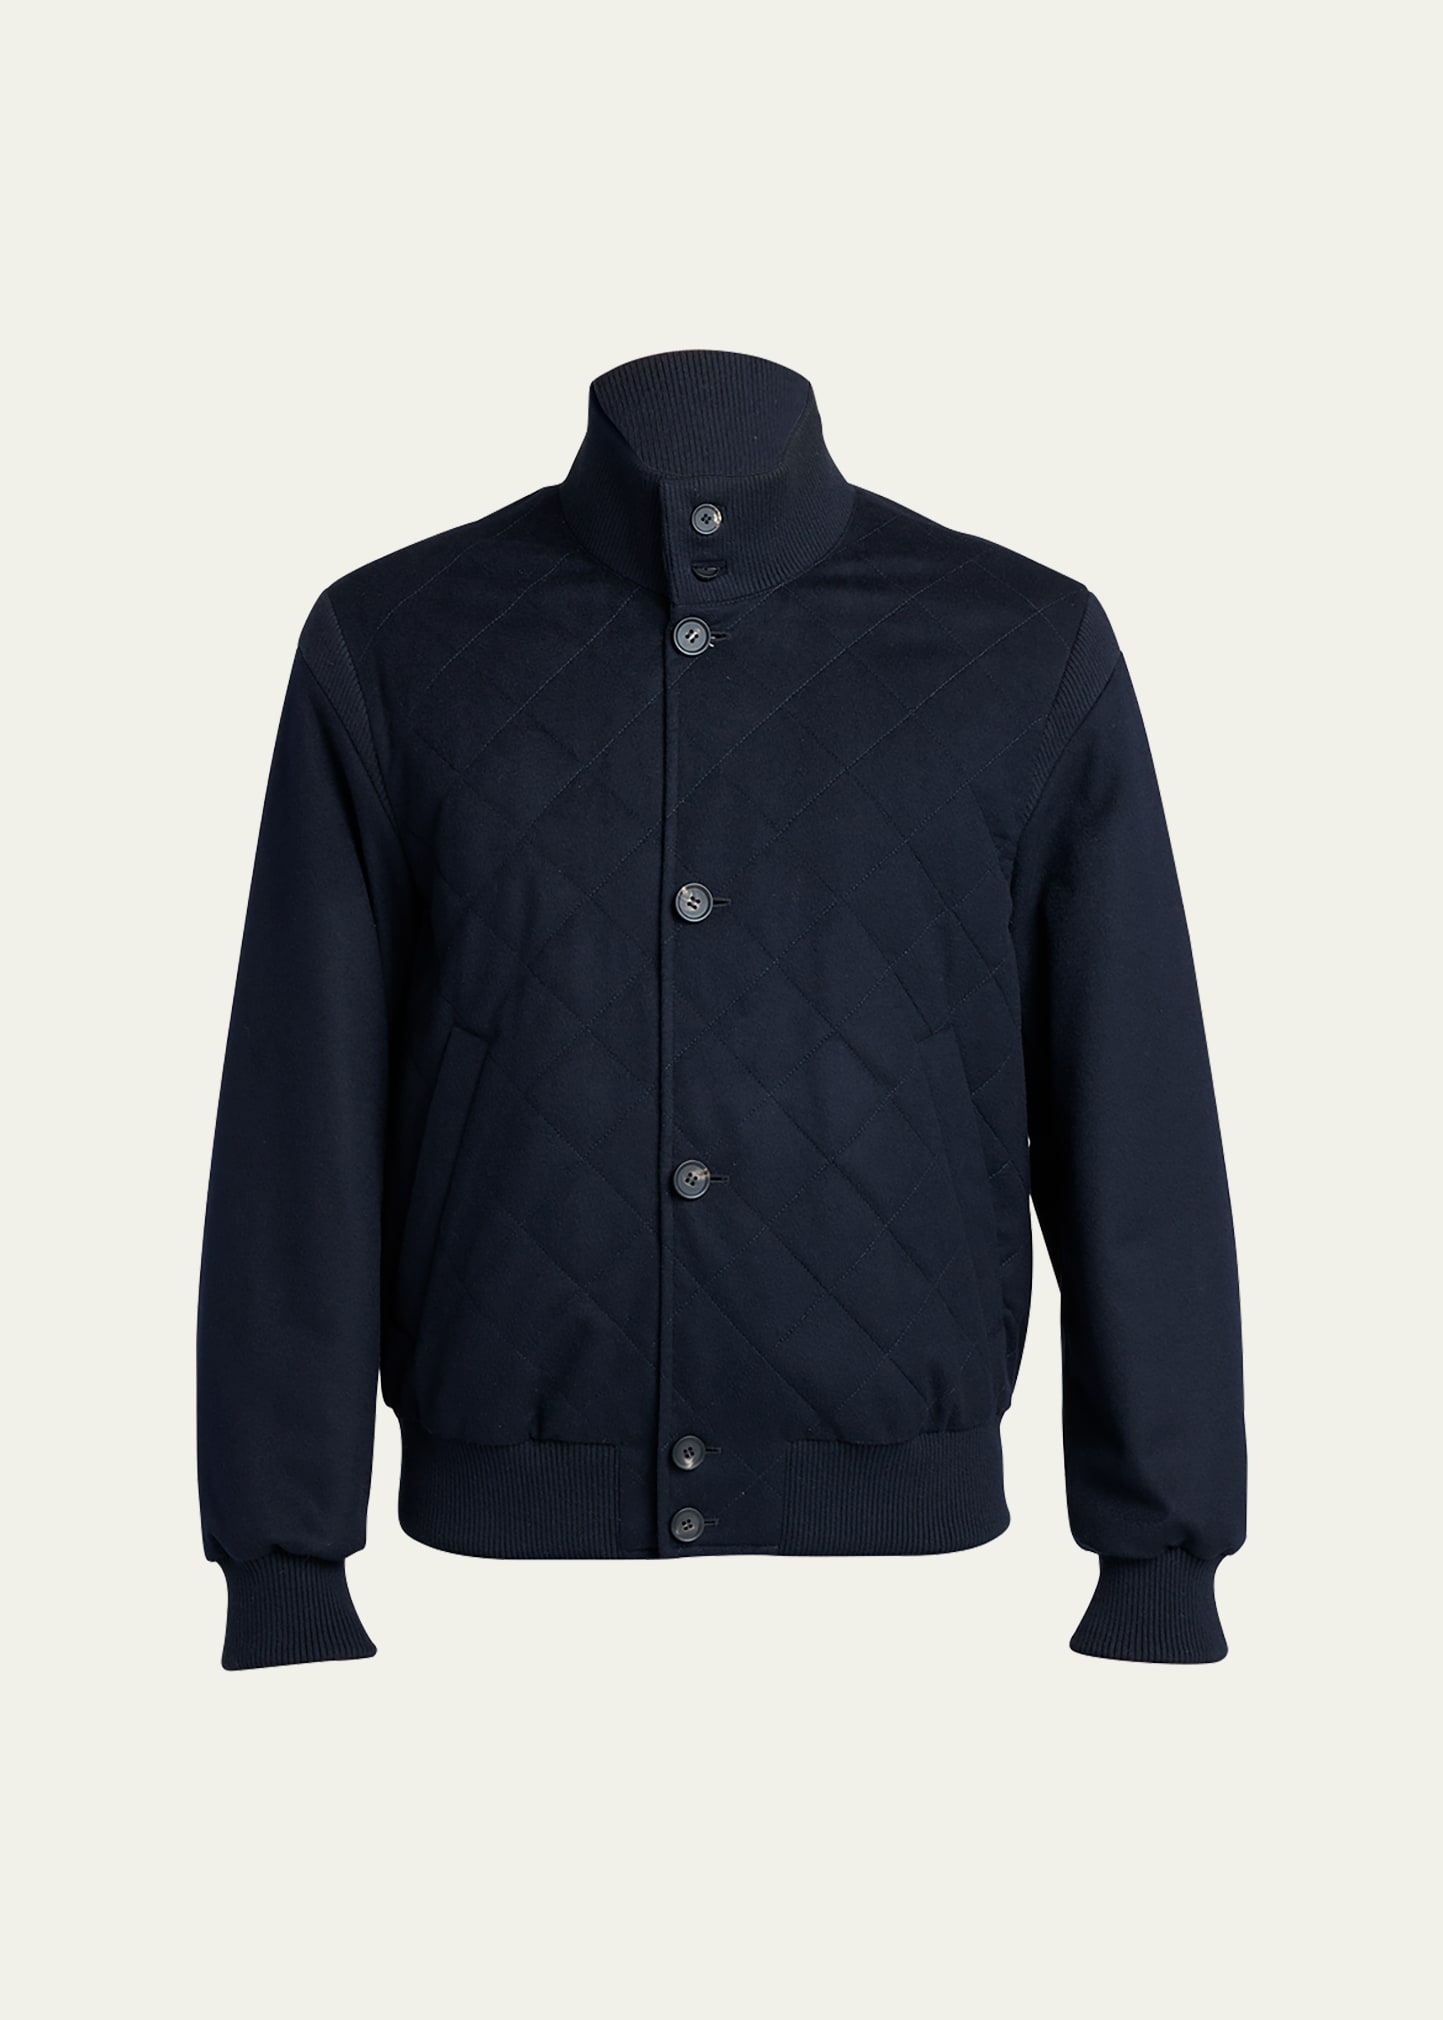 Men's Reversible Quilted Cashmere Bomber Jacket